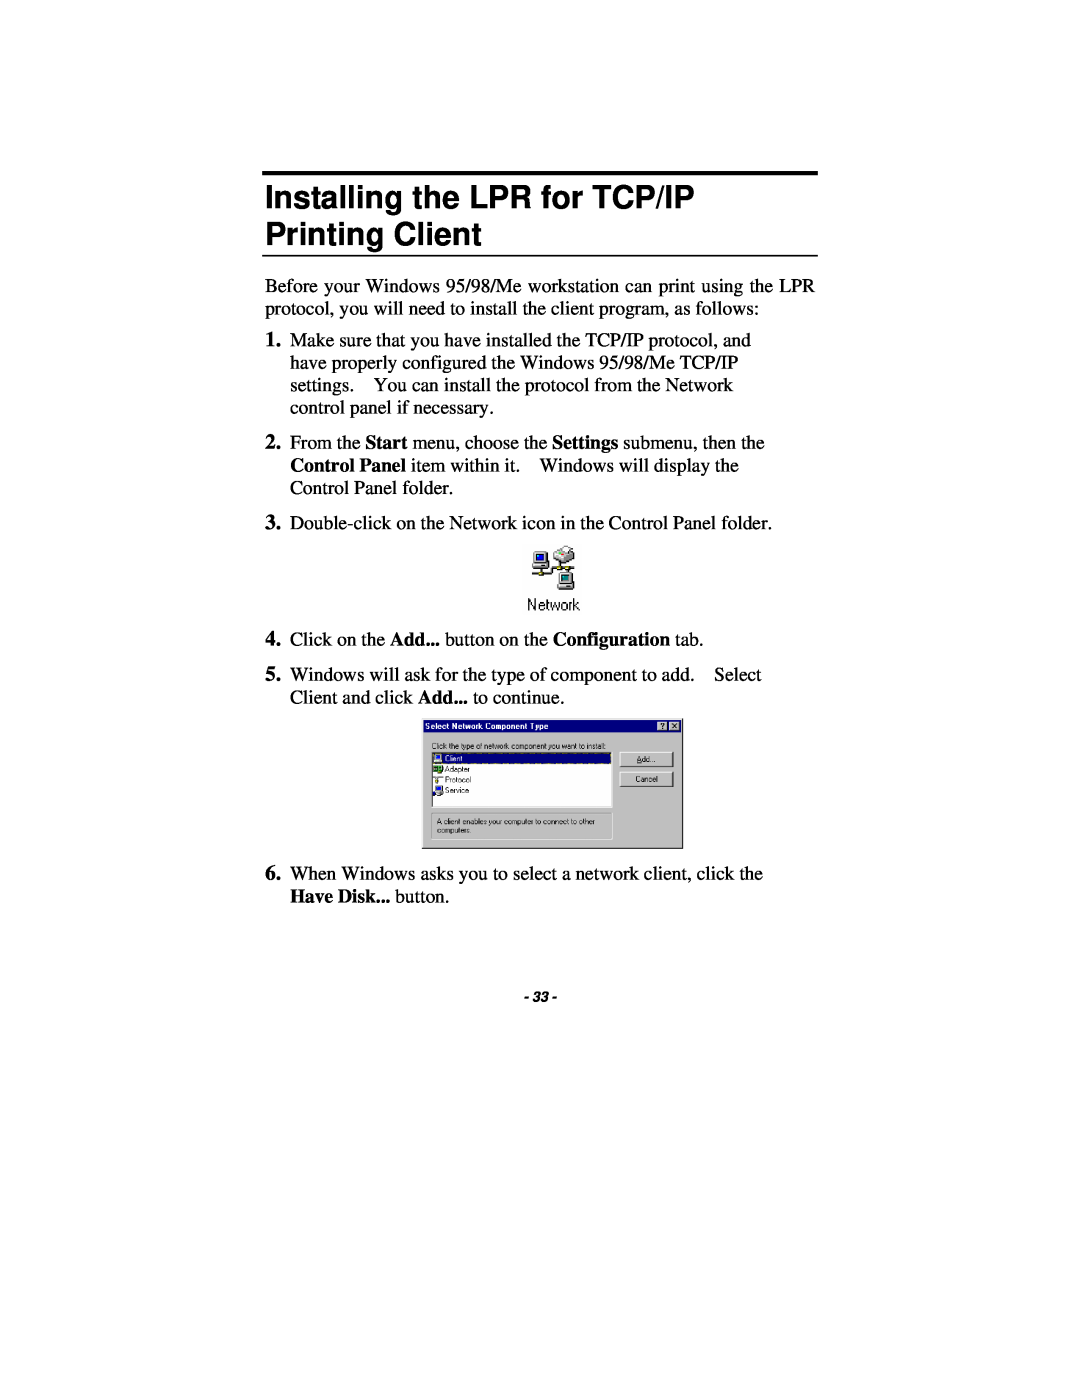 TRENDnet TE100-P1P manual Installing the LPR for TCP/IP Printing Client 